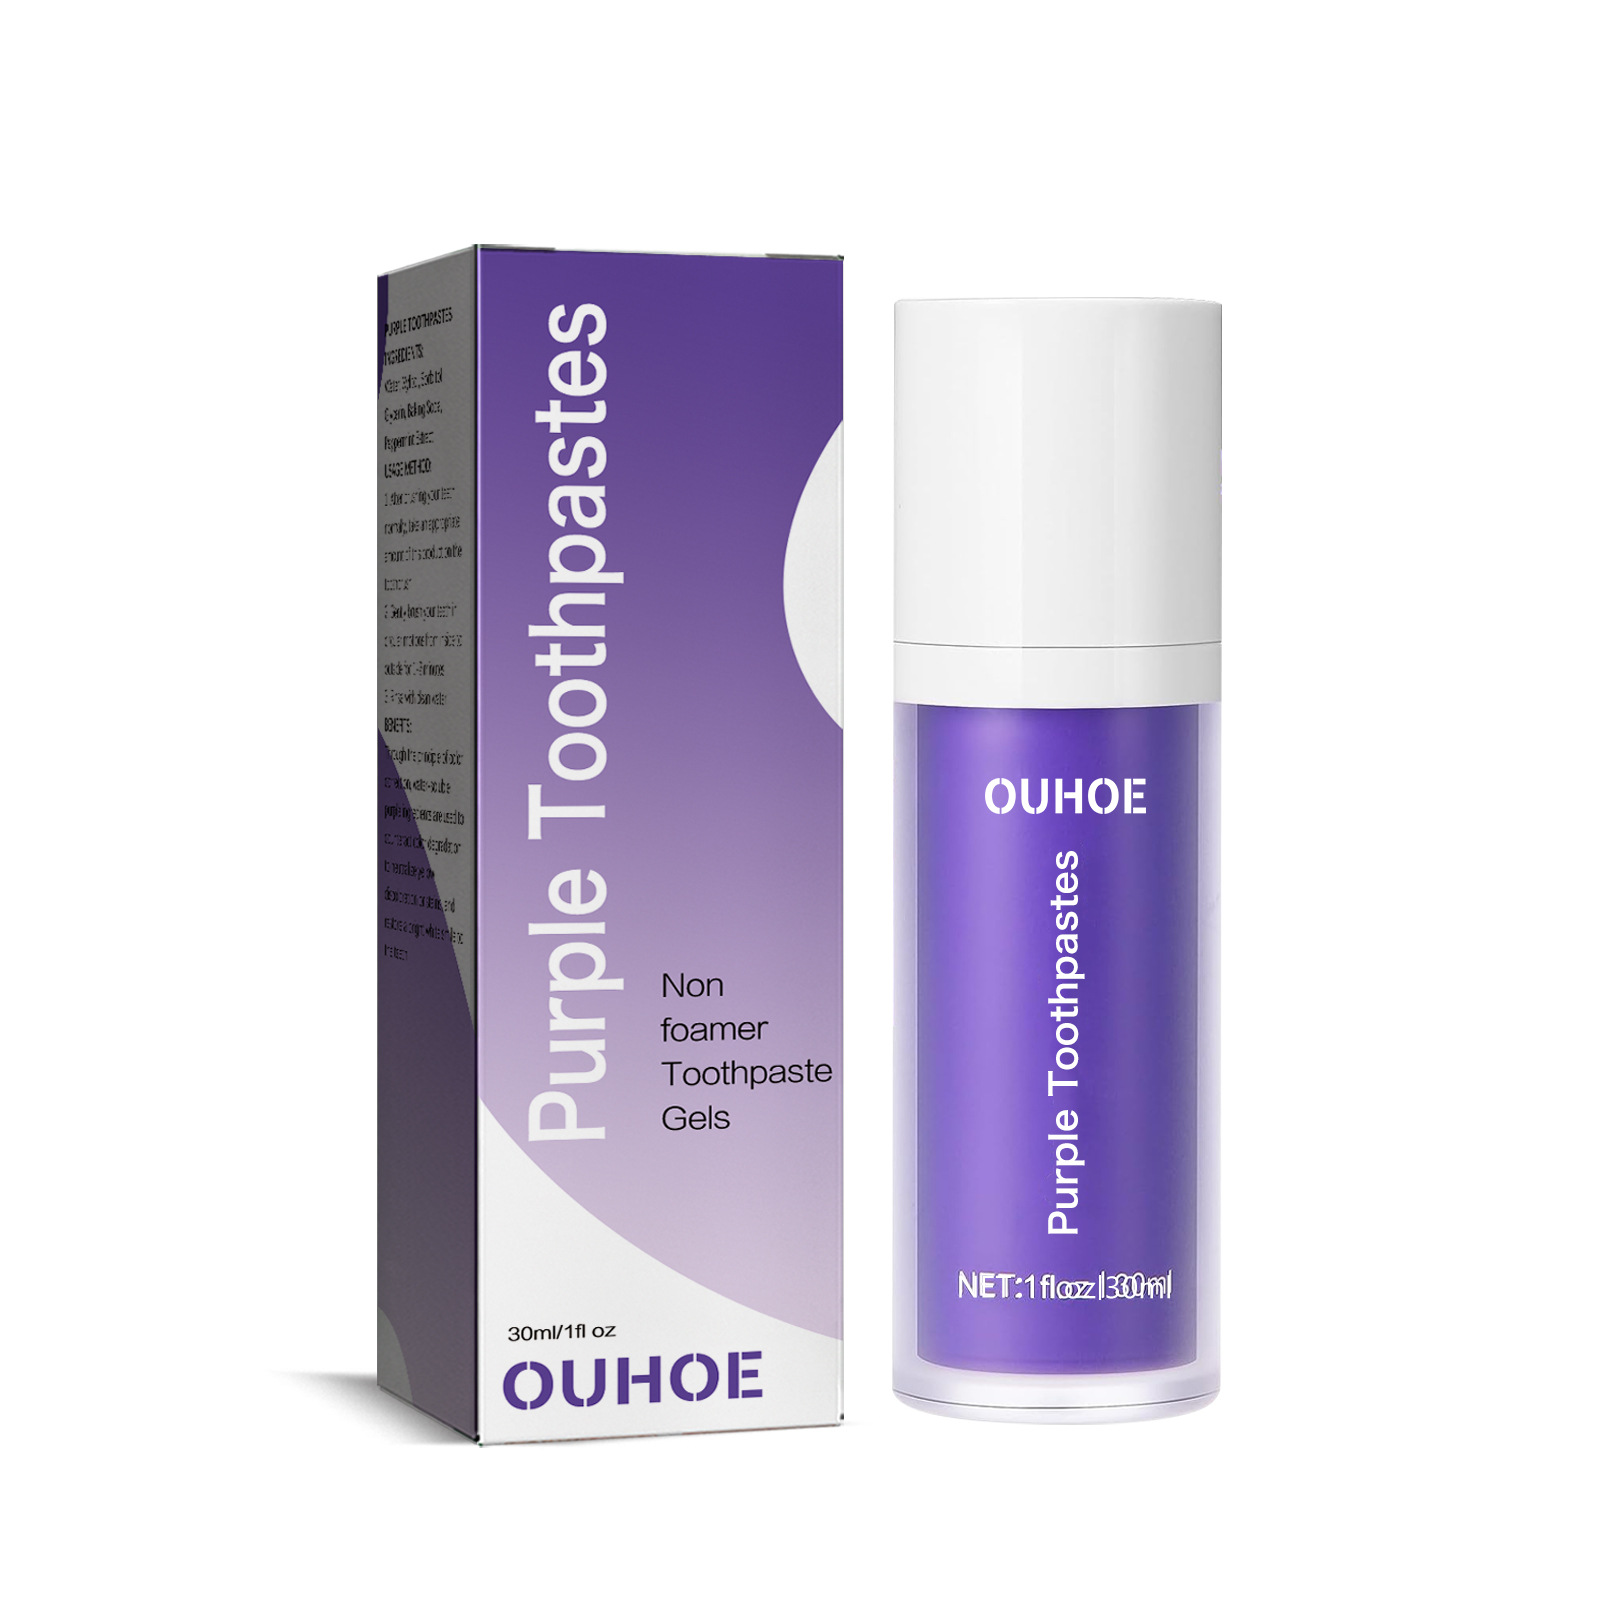 Ouhoe Teeth Whitening Toothpaste